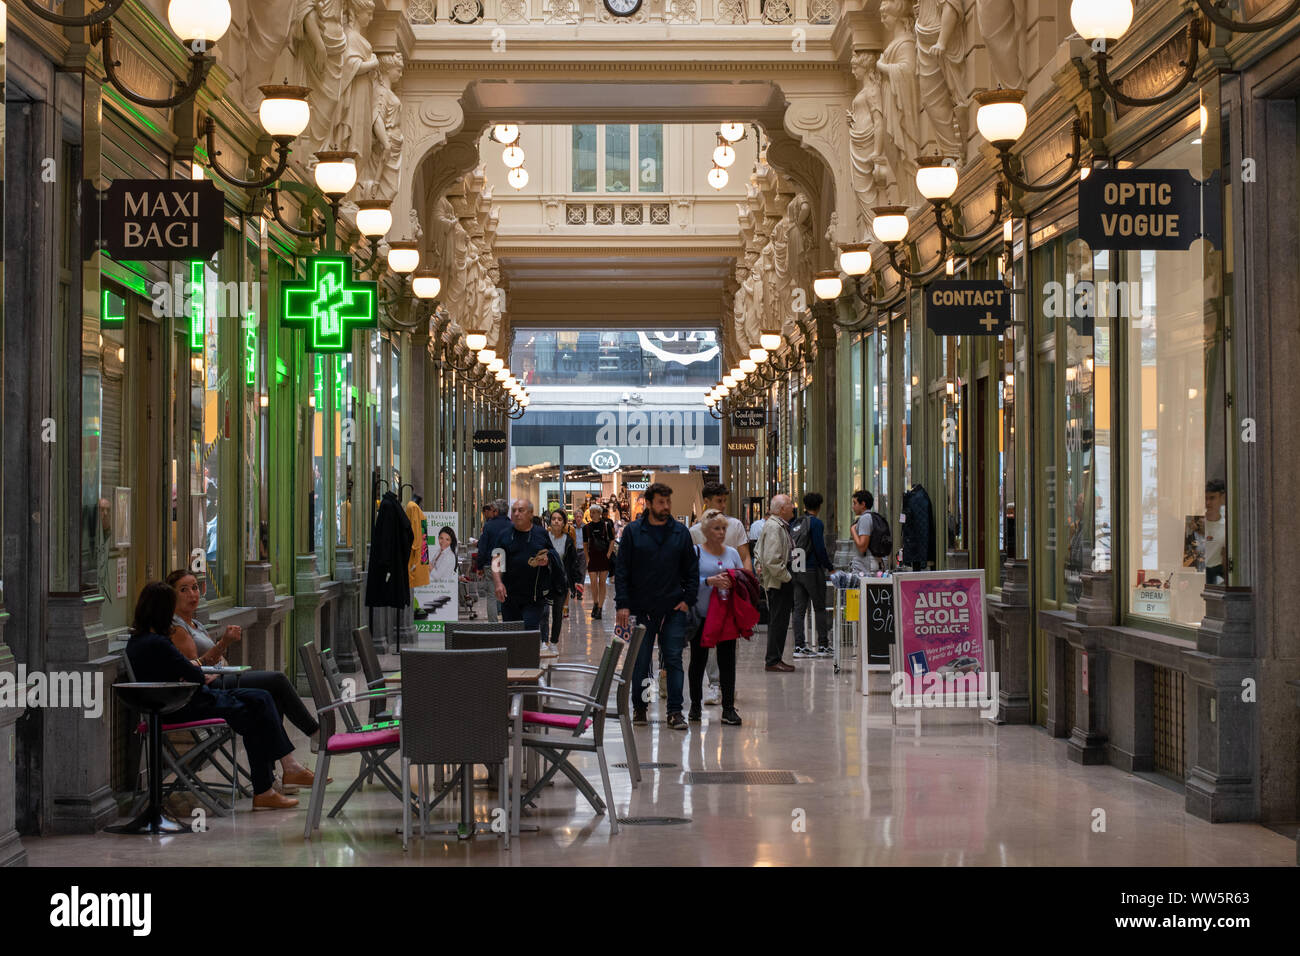 Shopping gallery in central Brussels, Belgium, with visitors browsing shops and cafes Stock Photo